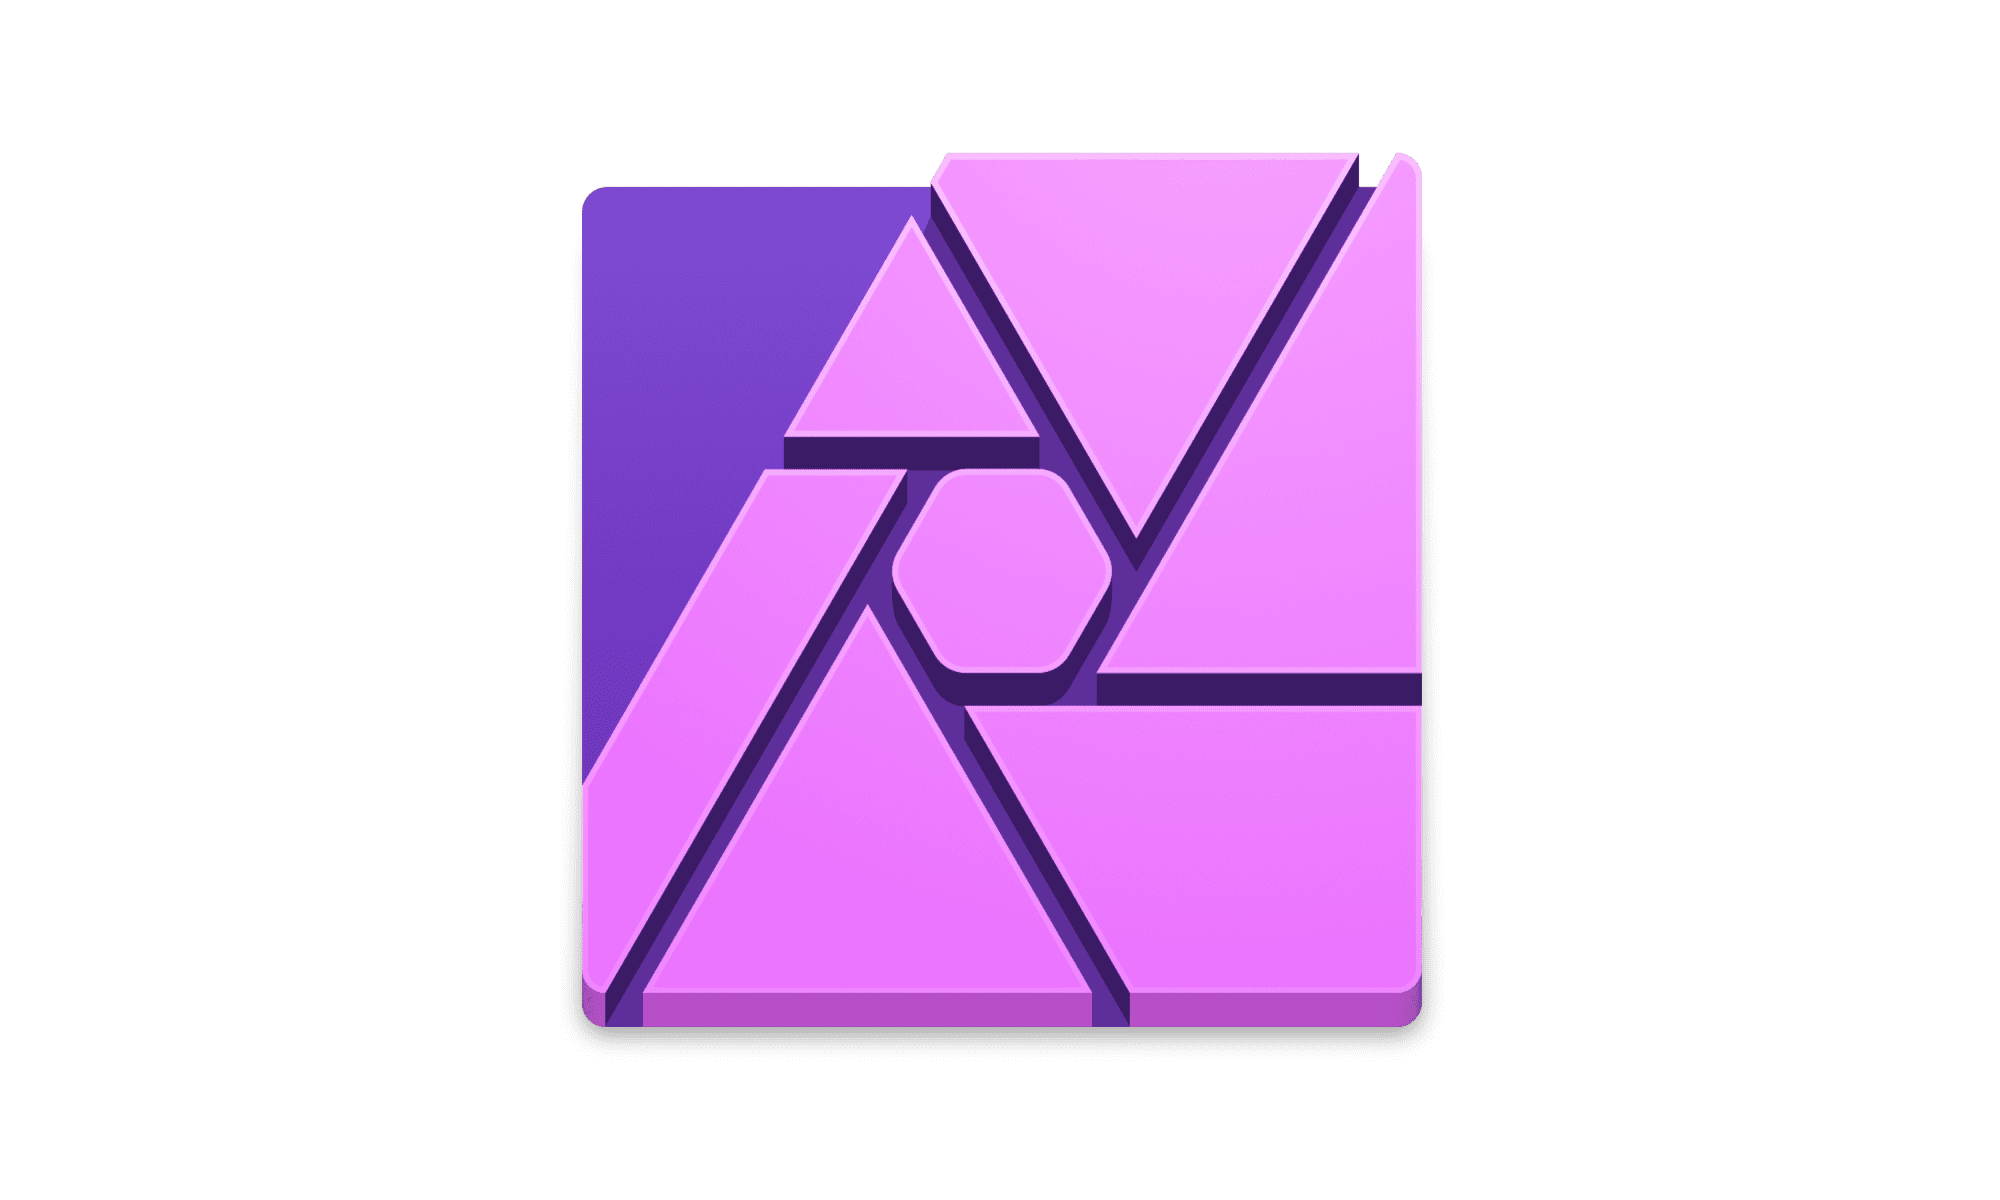 download the last version for ipod Serif Affinity Photo 2.1.1.1847